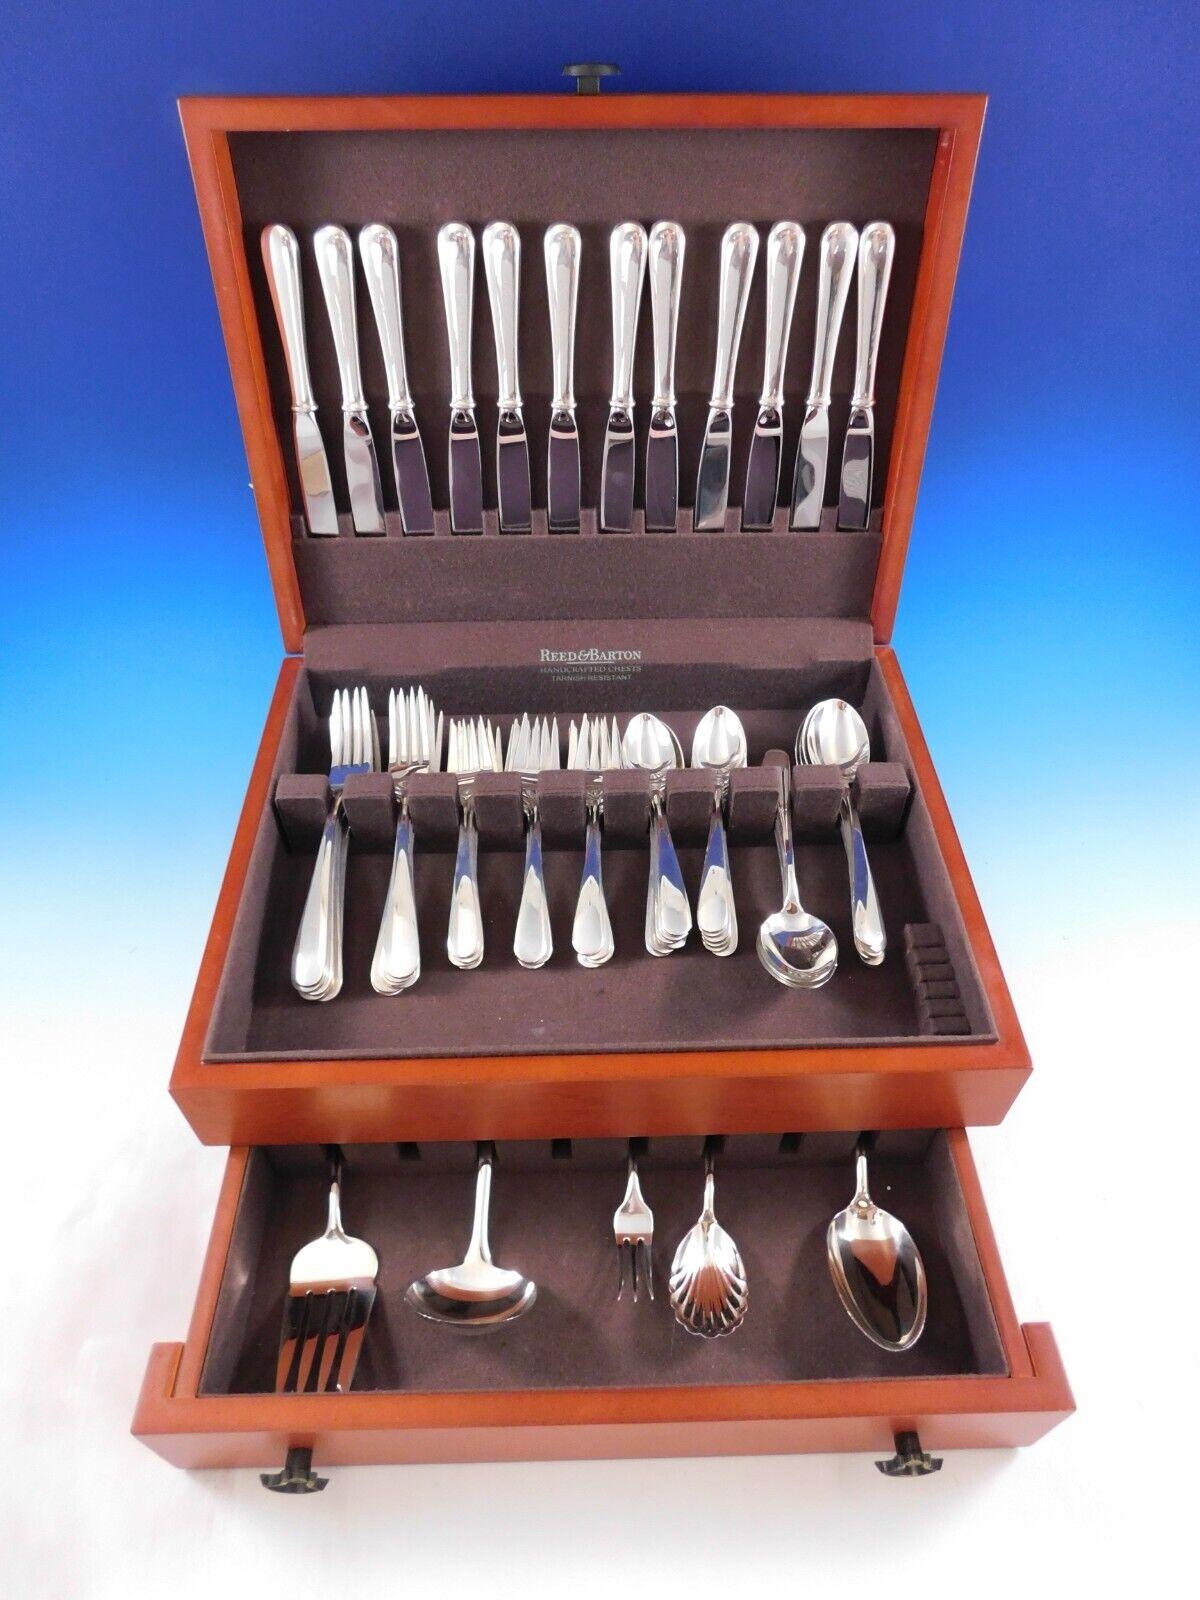 Dinner Size Old Maryland Plain by Kirk Sterling Silver Flatware set - 65 pieces. This set includes:

12 Knives, 8 7/8